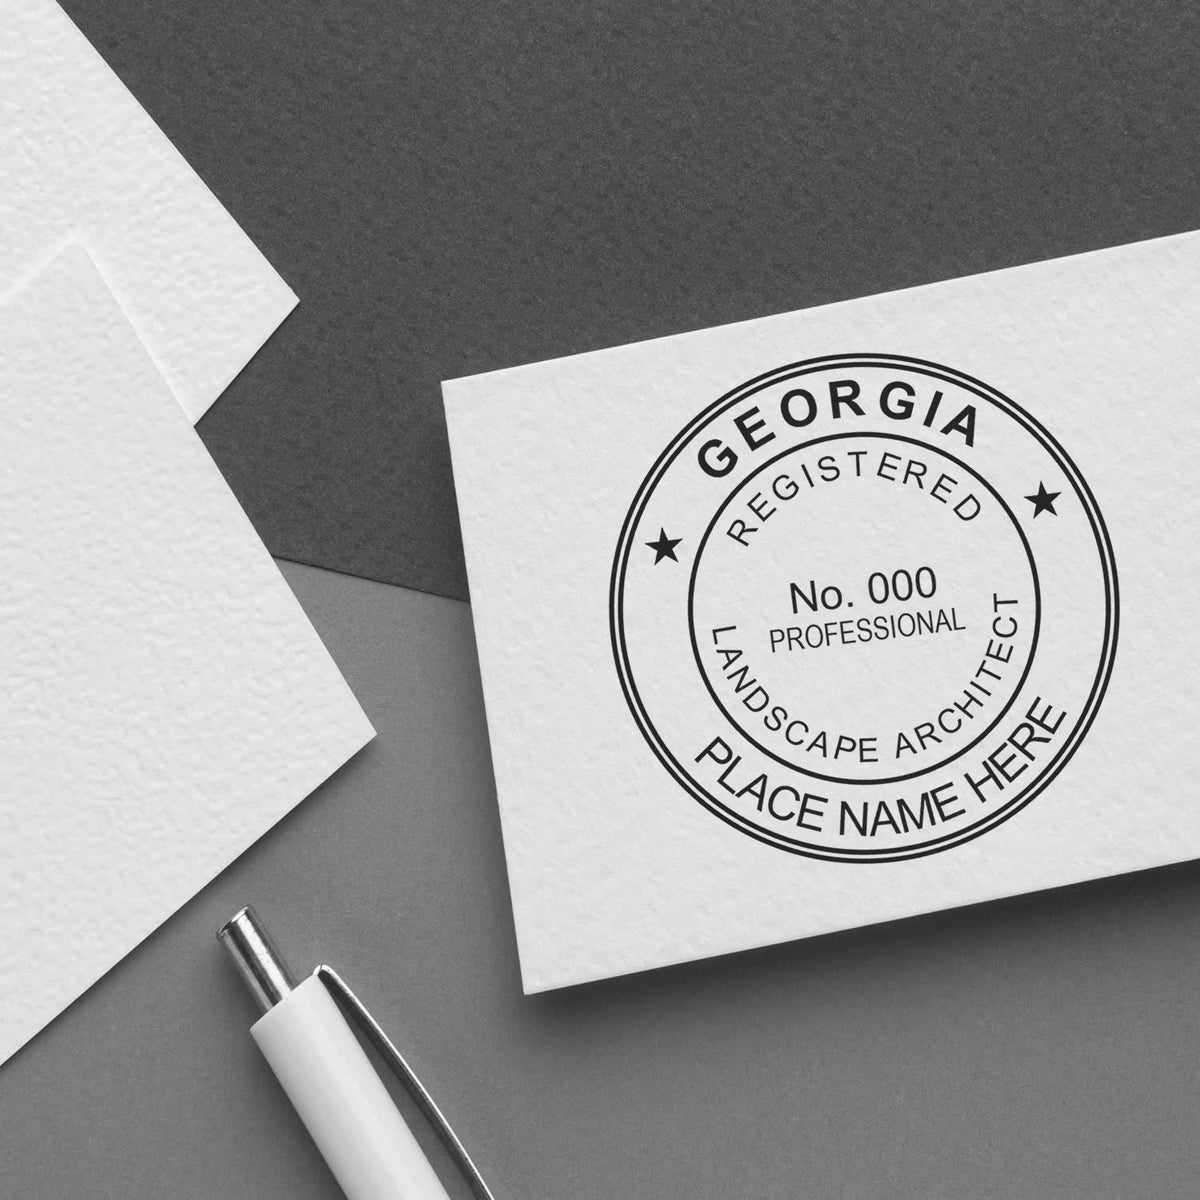 A stamped impression of the Digital Georgia Landscape Architect Stamp in this stylish lifestyle photo, setting the tone for a unique and personalized product.